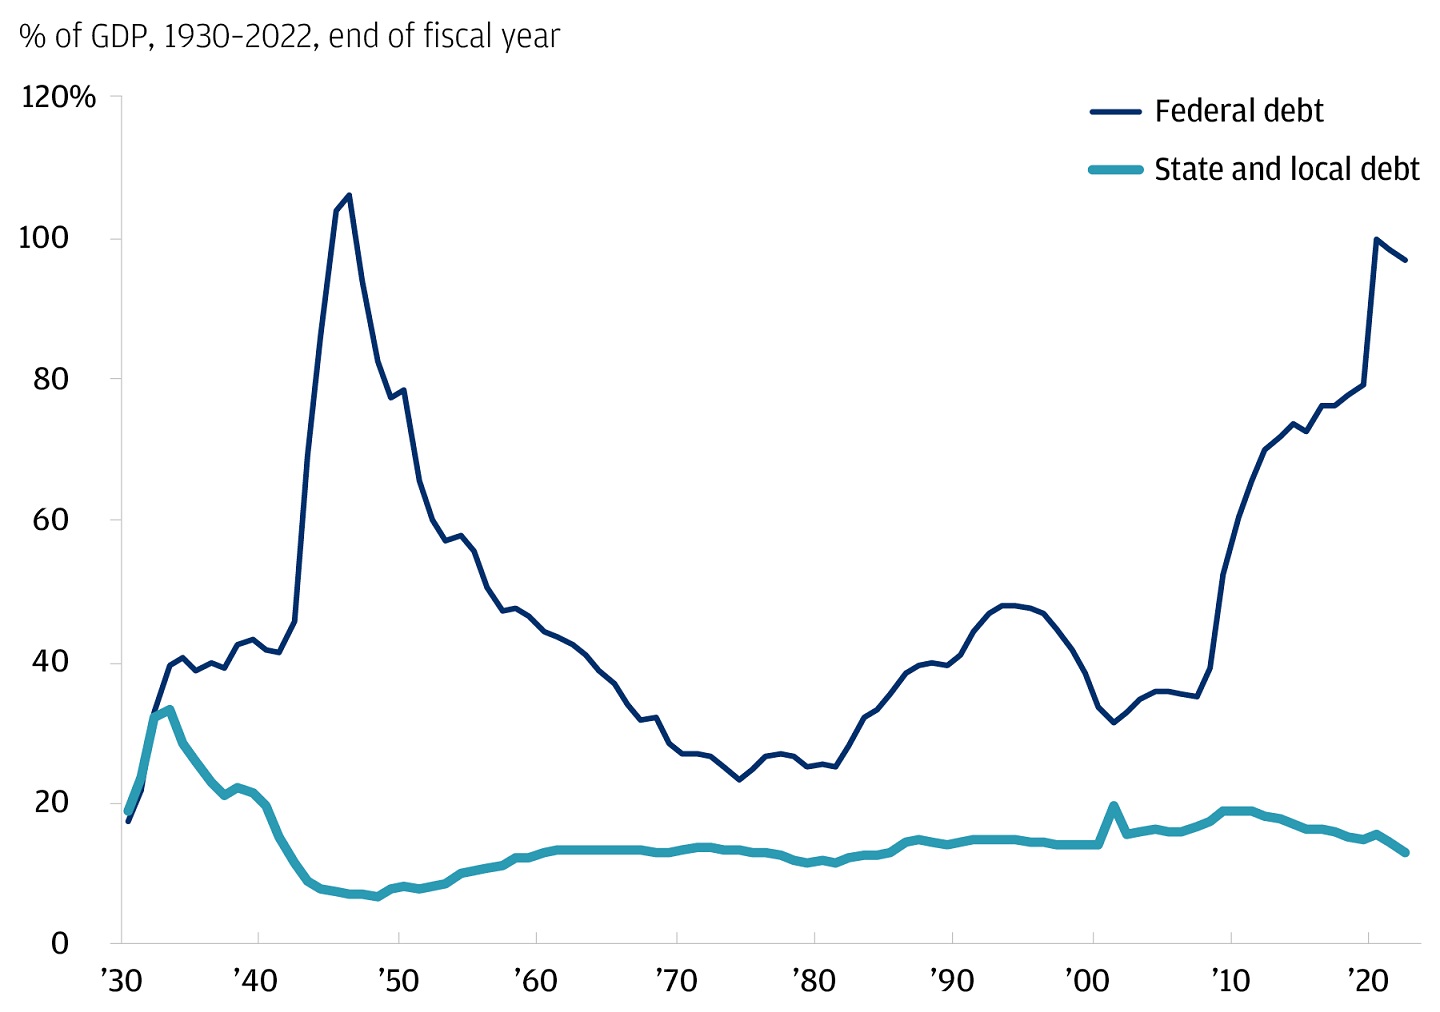 Line chart showing the level of federal debt versus state and local debt in relation to GDP from 1930-2022.  